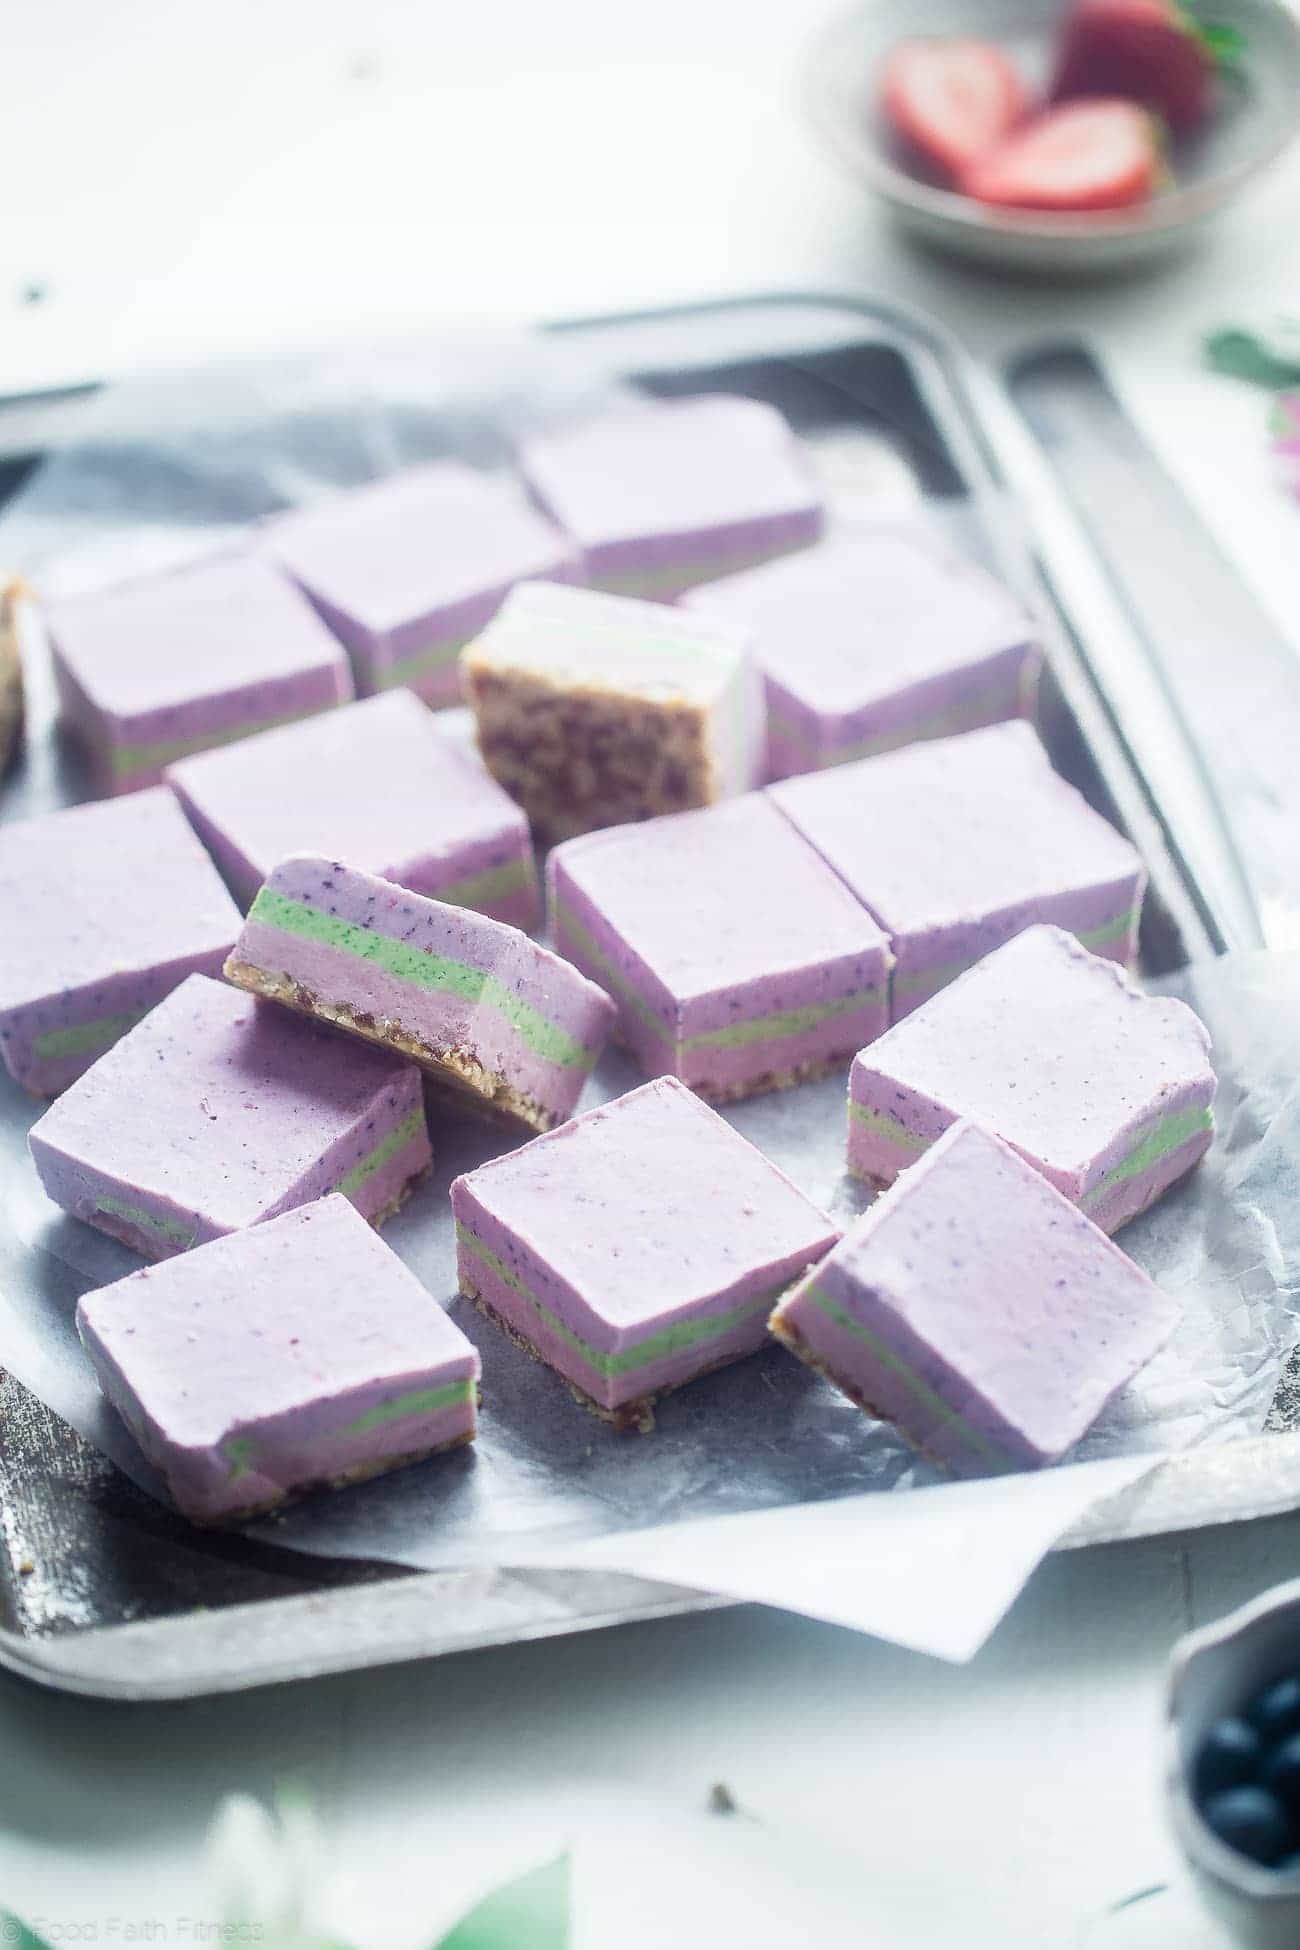 No Bake Superfood Berry Cashew Cream bars - These vegan bars are naturally colored with fruit and vegetables! They're so creamy you'll never know they're healthy and dairy and gluten free! Perfect for Easter! | Foodfaithfitness.com | @FoodFaithFit